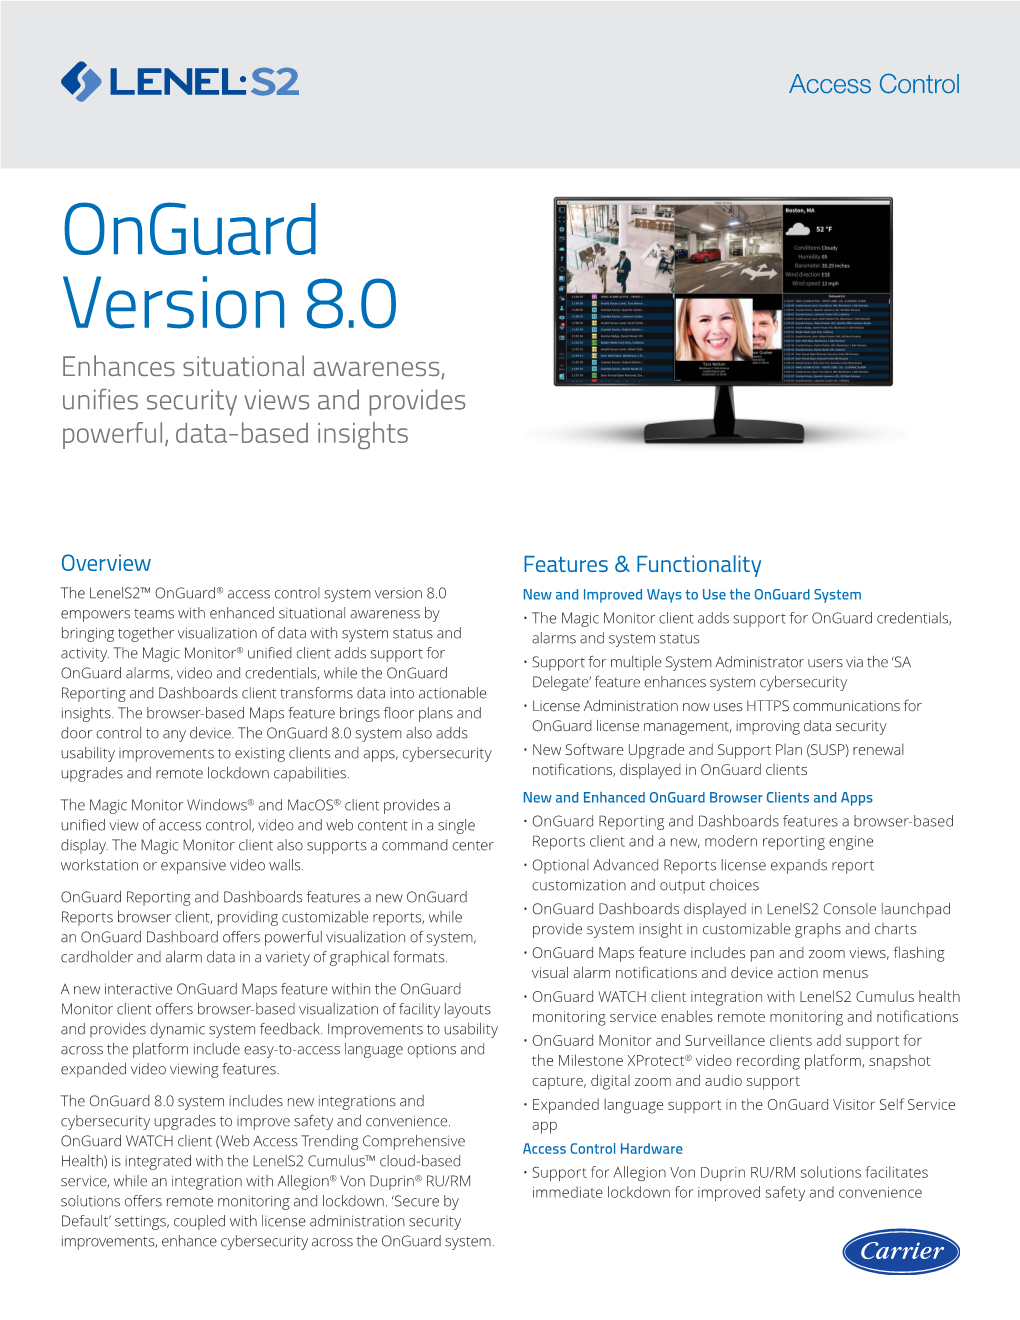 Onguard Version 8.0 Enhances Situational Awareness, Unifies Security Views and Provides Powerful, Data-Based Insights